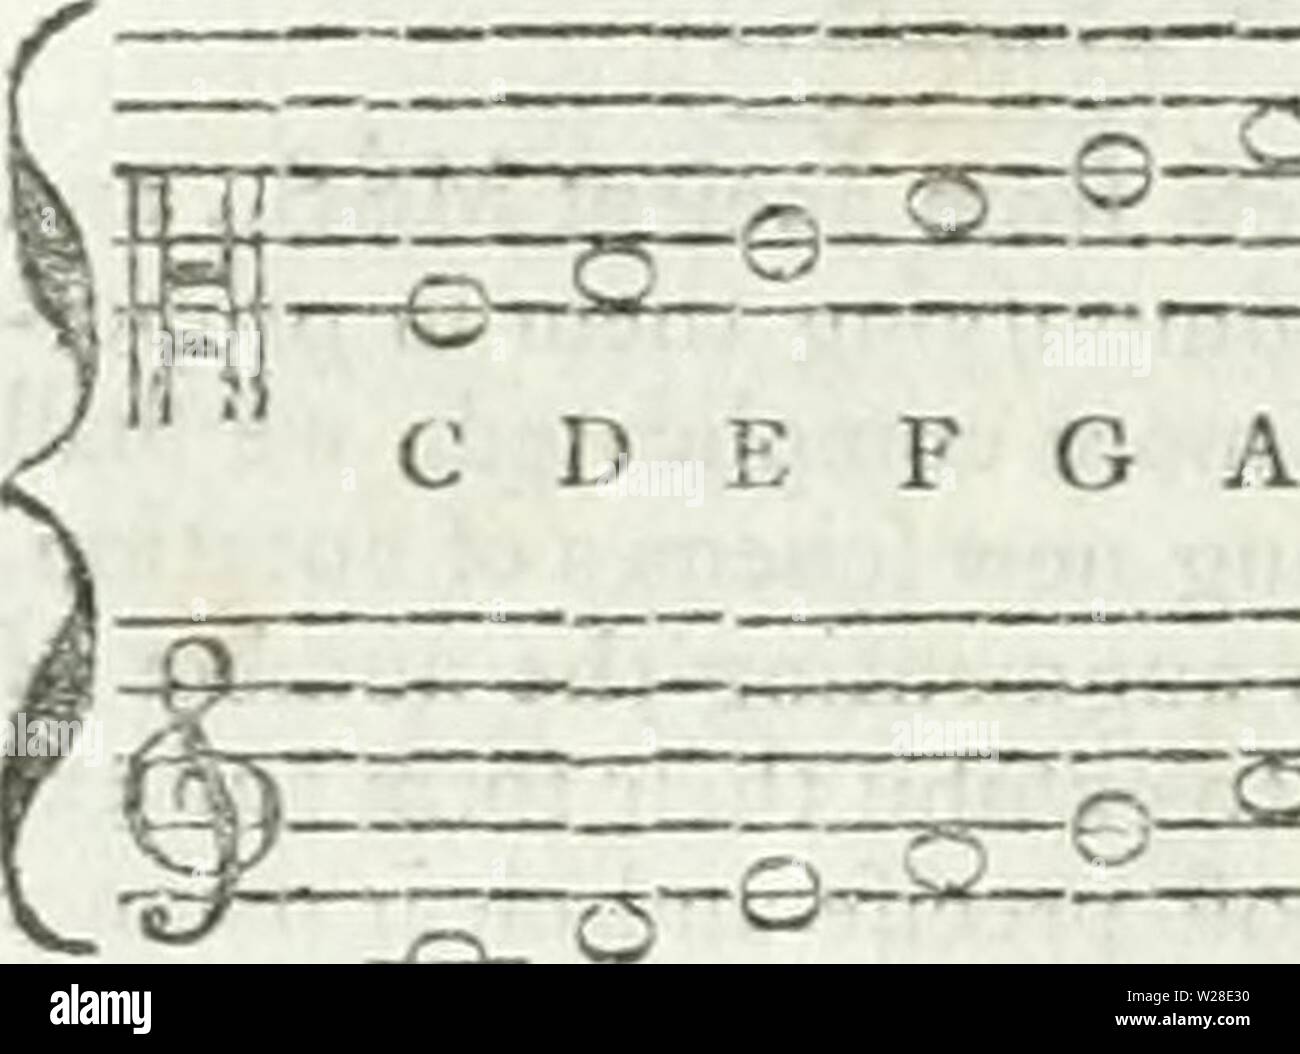 Archive Image From Page 429 Of The Cyclopaedia Or Universal Dictionary The Cyclopaedia Or Universal Dictionary Of Arts Sciences And Literature Cyclopaediaoruni08rees Year 1819 C Soprano Or Fupreme Clef In Which All